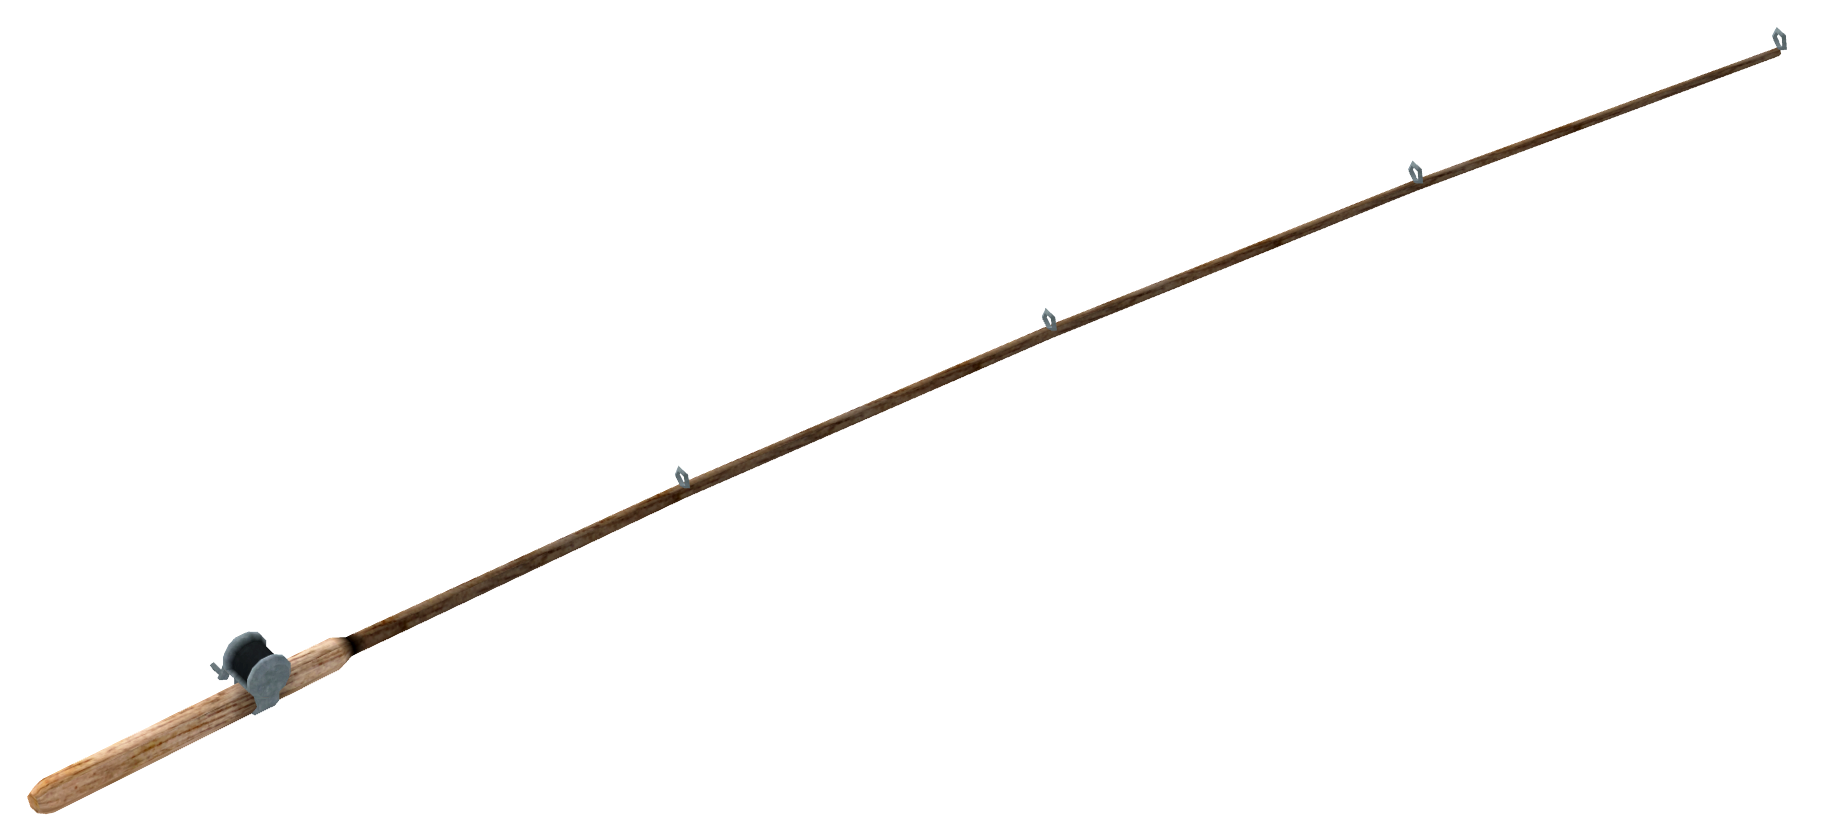 Download Pole Wood Fishing Free Transparent Image HD HQ PNG Image